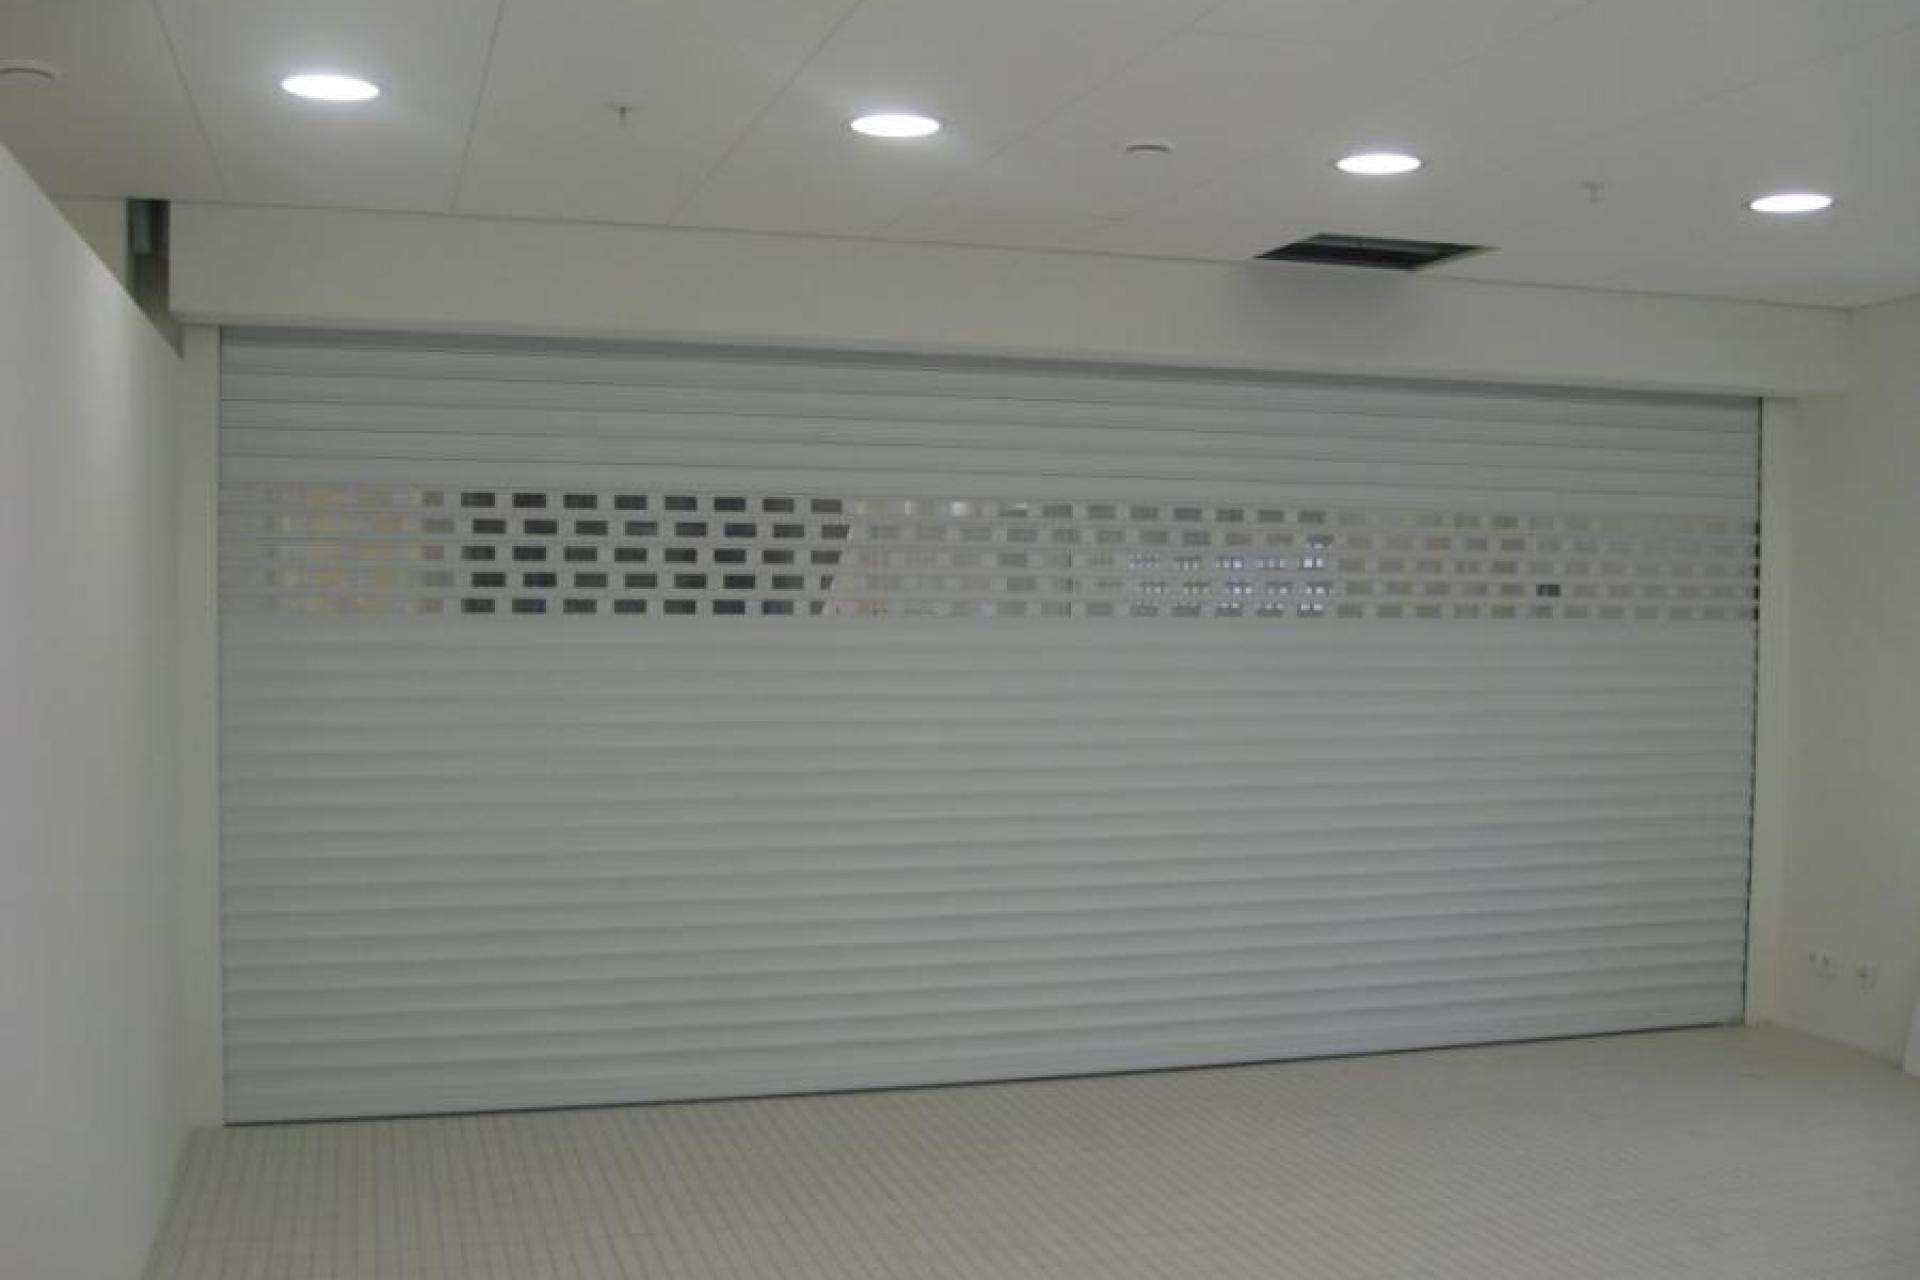 White Perforated roller shutter